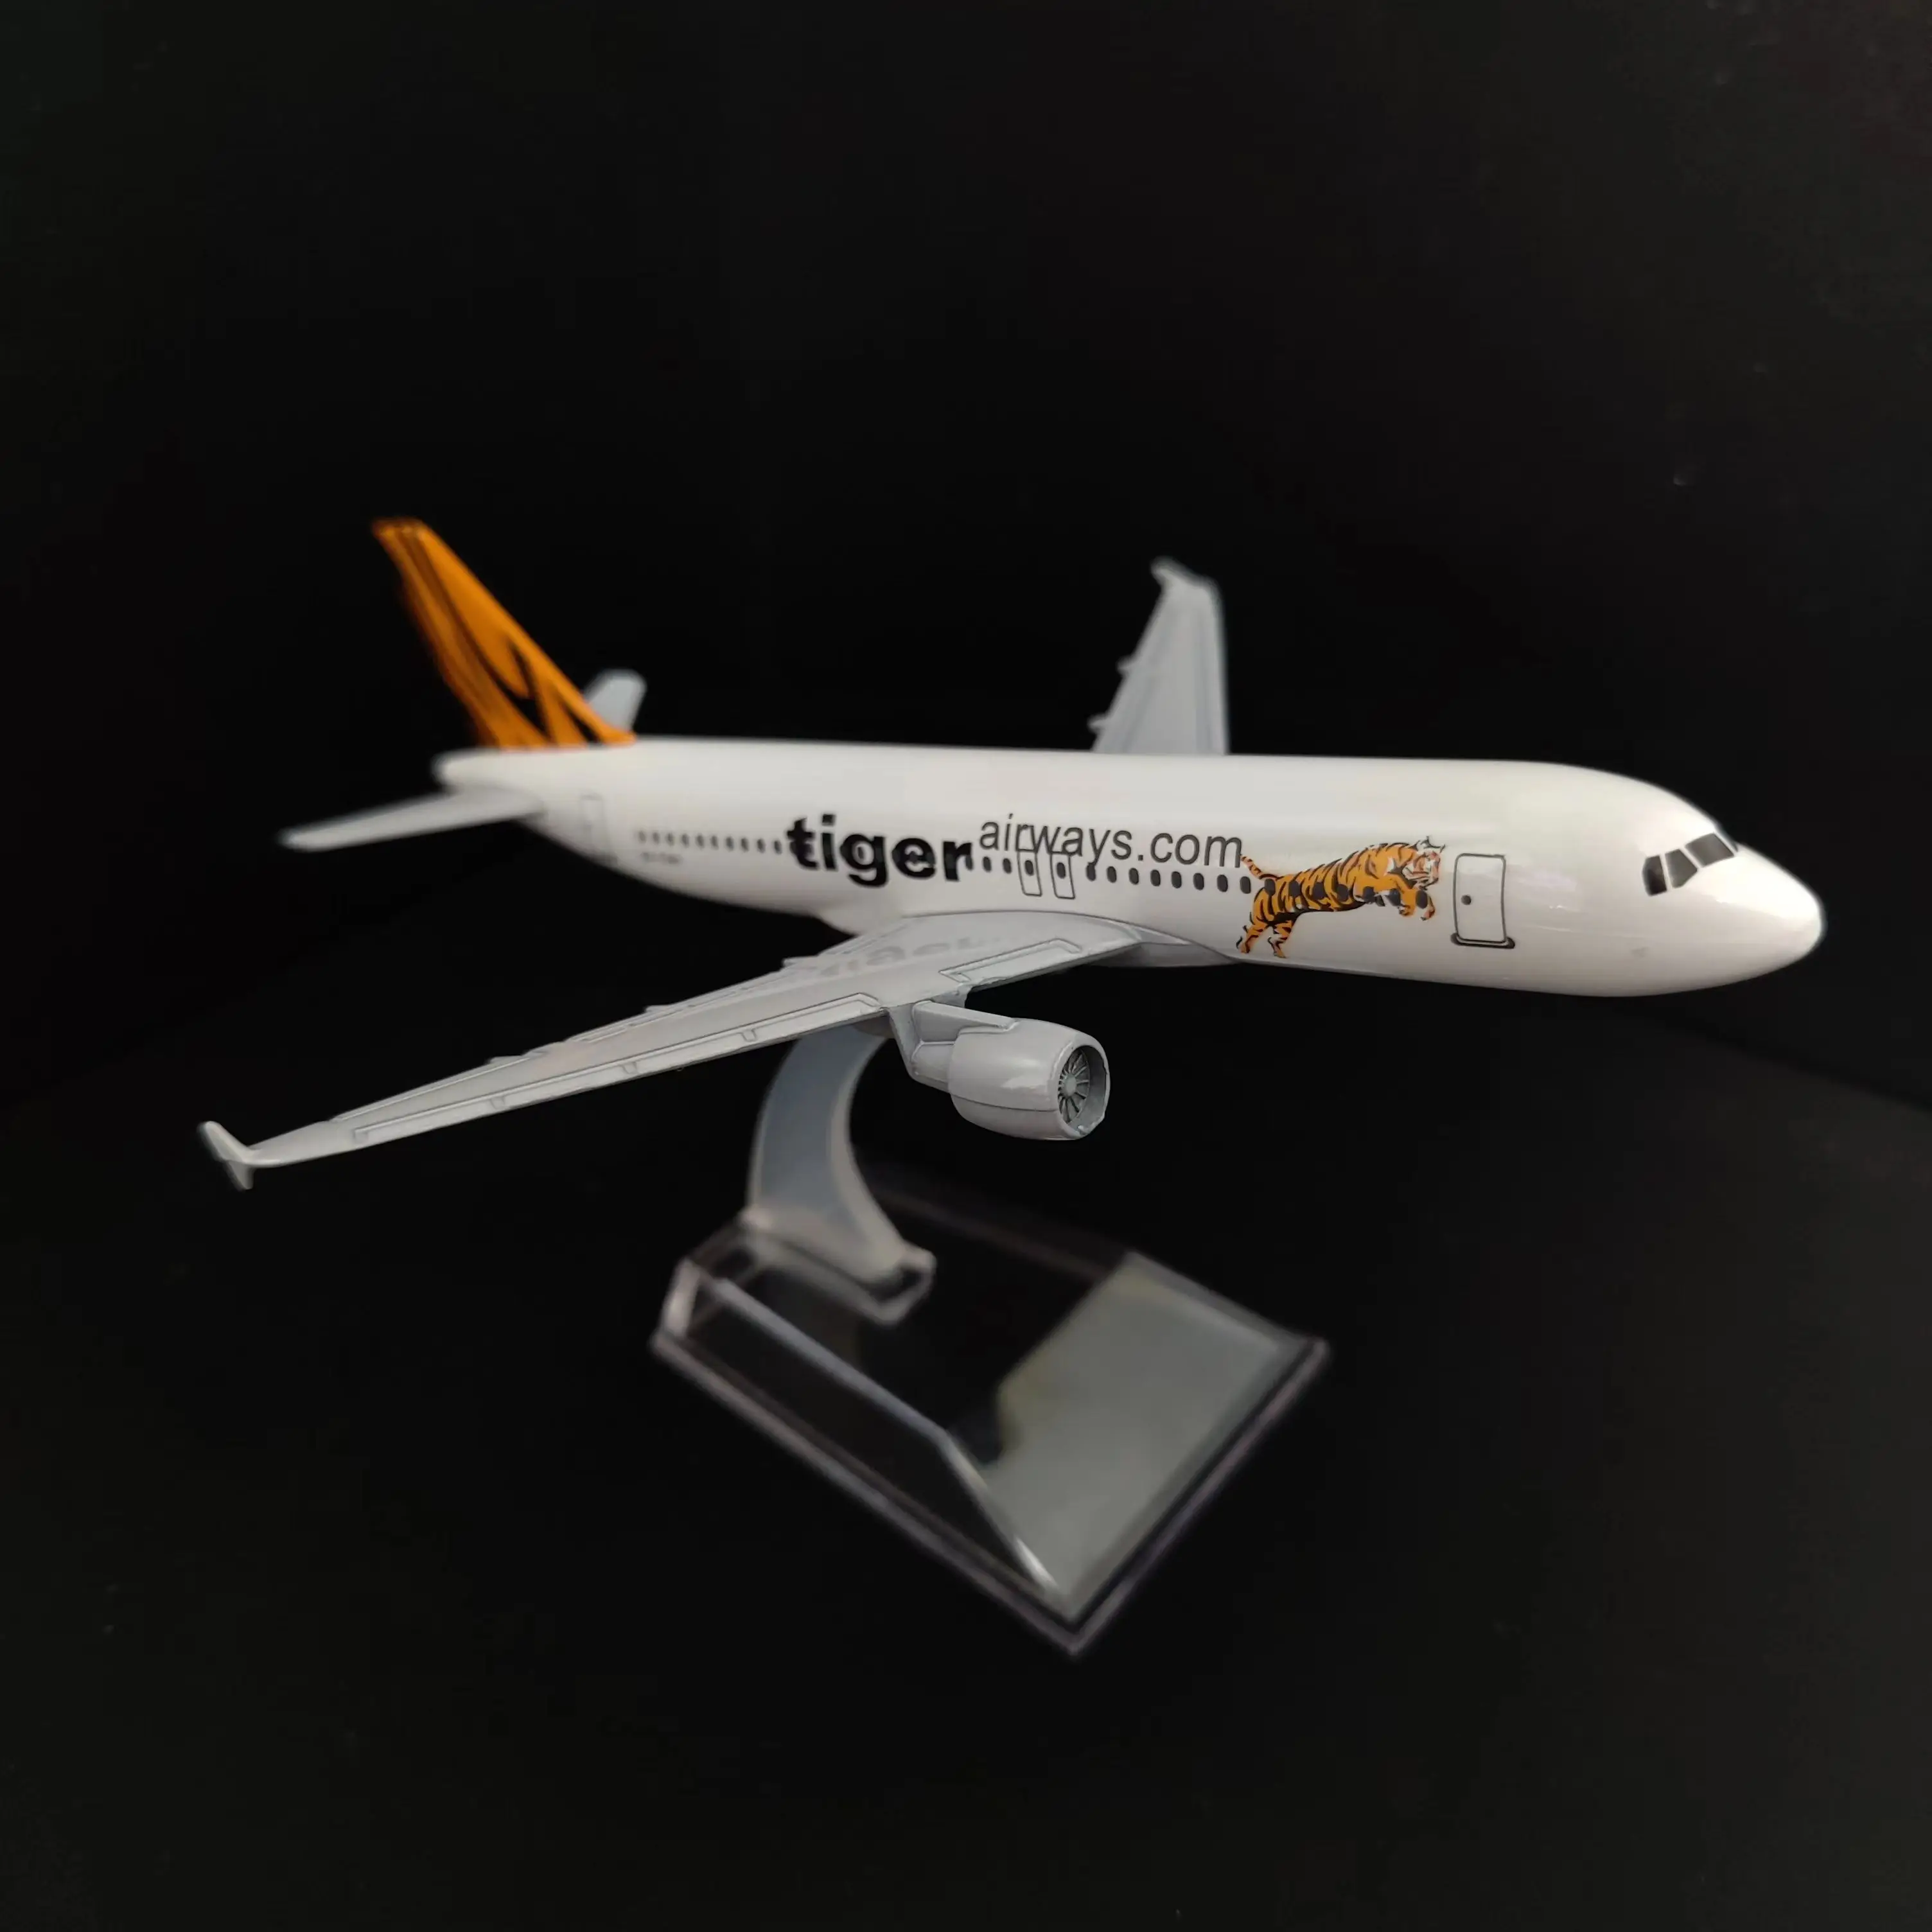 

Scale 1:400 Metal Aircraft Replica 15cm Singapore Tiger Air Asia Airlines Boeing Airbus Airplane Model Miniature Gift for Boys